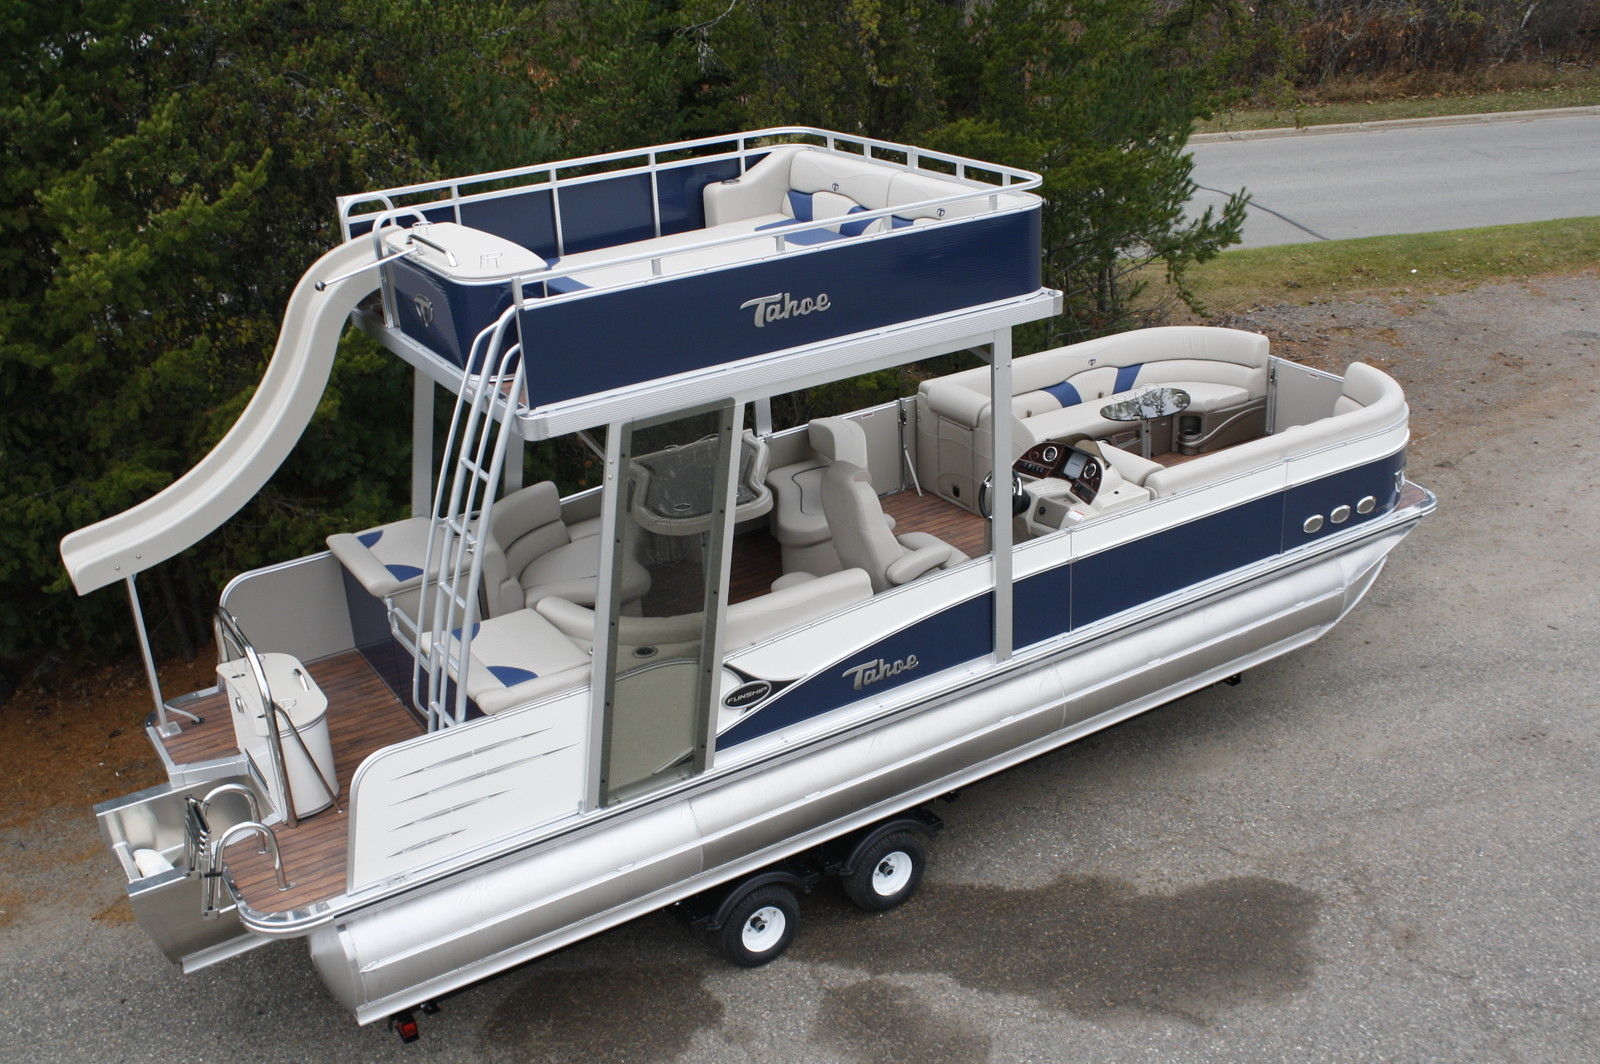 Tahoe Grand Island 25 2016 for sale for $39,999 - Boats ...